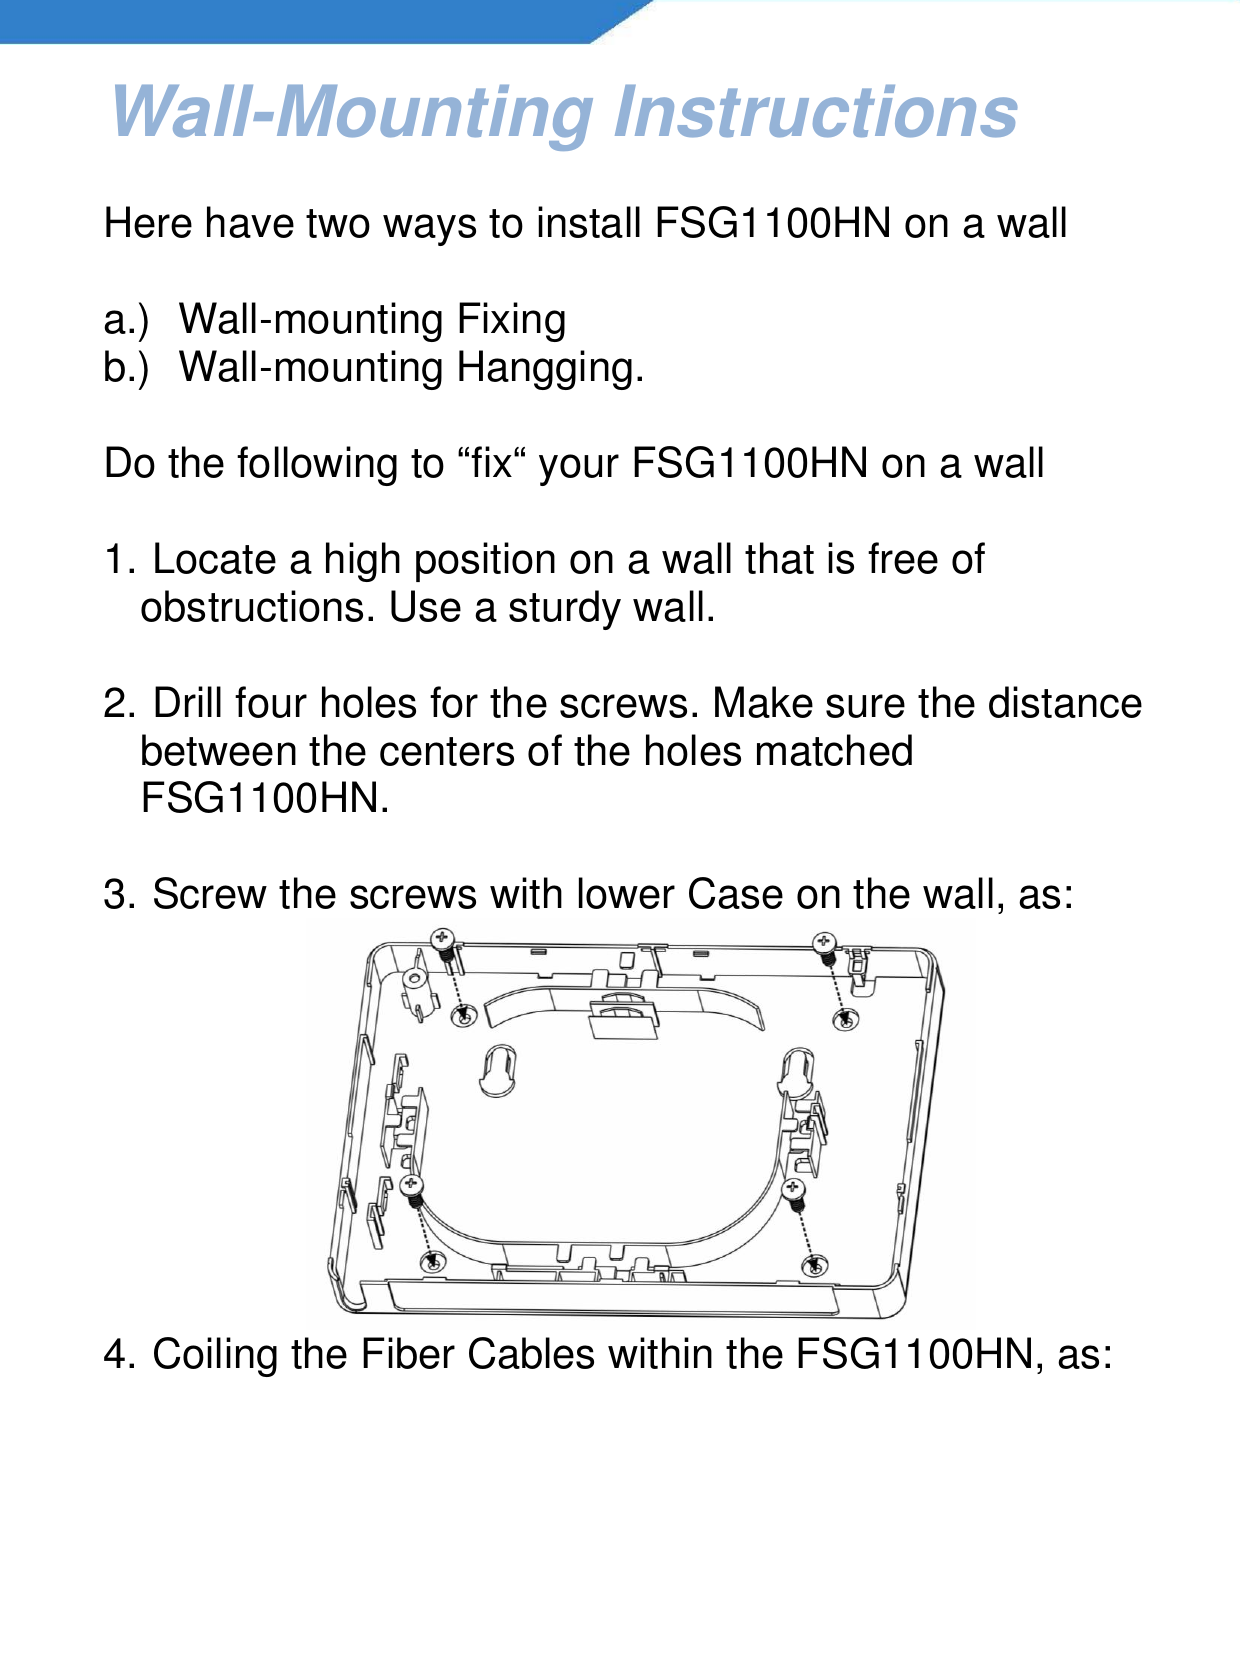   Wall-Mounting Instructions  Here have two ways to install FSG1100HN on a wall  a.)  Wall-mounting Fixing b.)  Wall-mounting Hangging.   Do the following to “fix“ your FSG1100HN on a wall  1.  Locate a high position on a wall that is free of obstructions. Use a sturdy wall.  2.  Drill four holes for the screws. Make sure the distance between the centers of the holes matched FSG1100HN.  3.  Screw the screws with lower Case on the wall, as:  4.  Coiling the Fiber Cables within the FSG1100HN, as: 